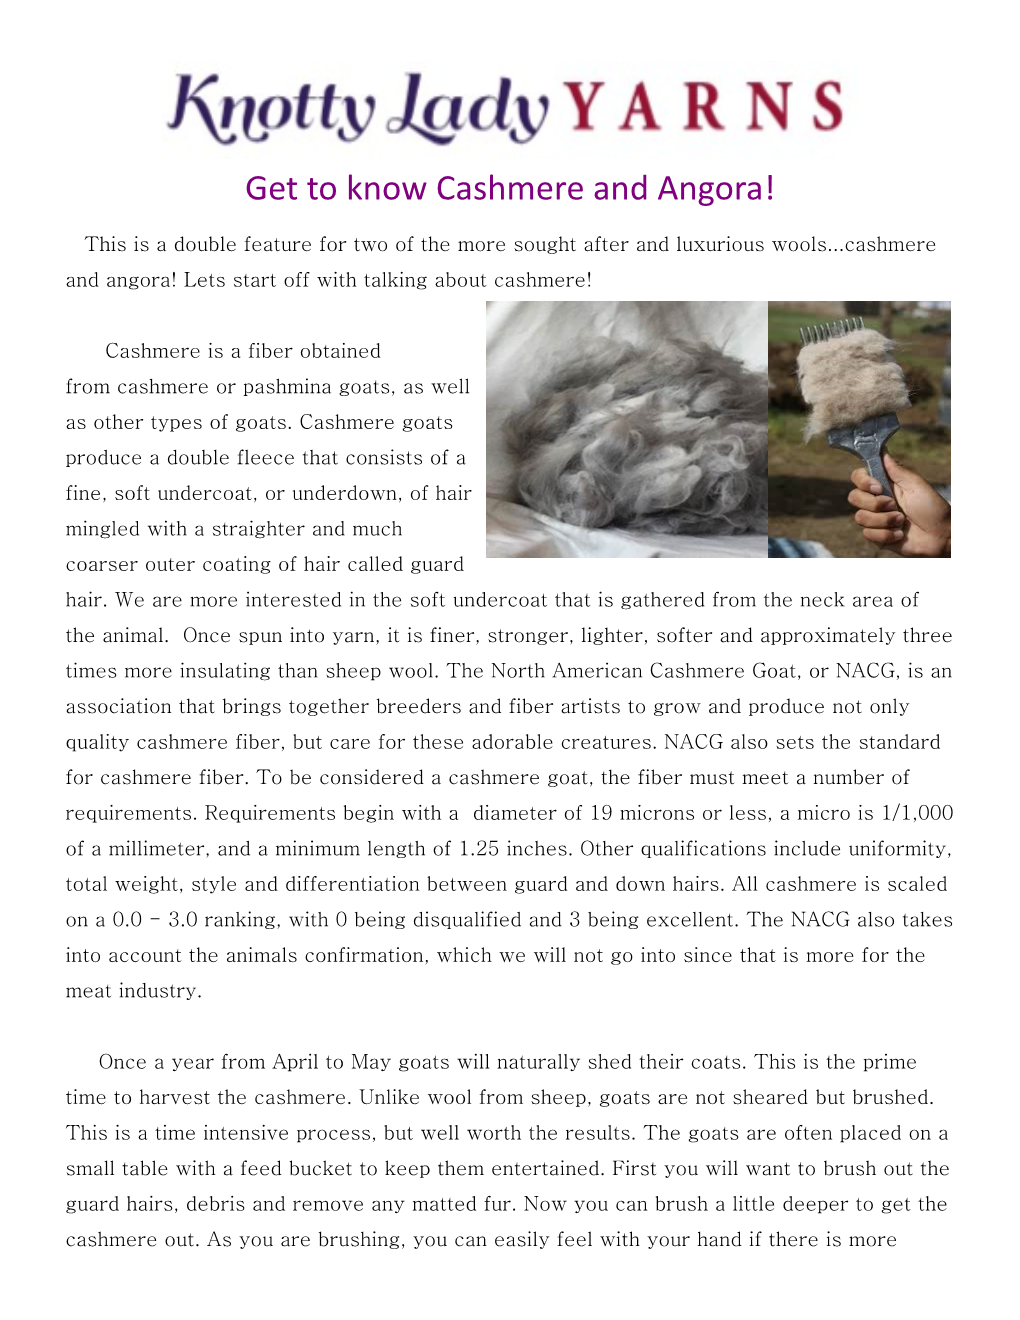 Get to Know Cashmere and Angora!